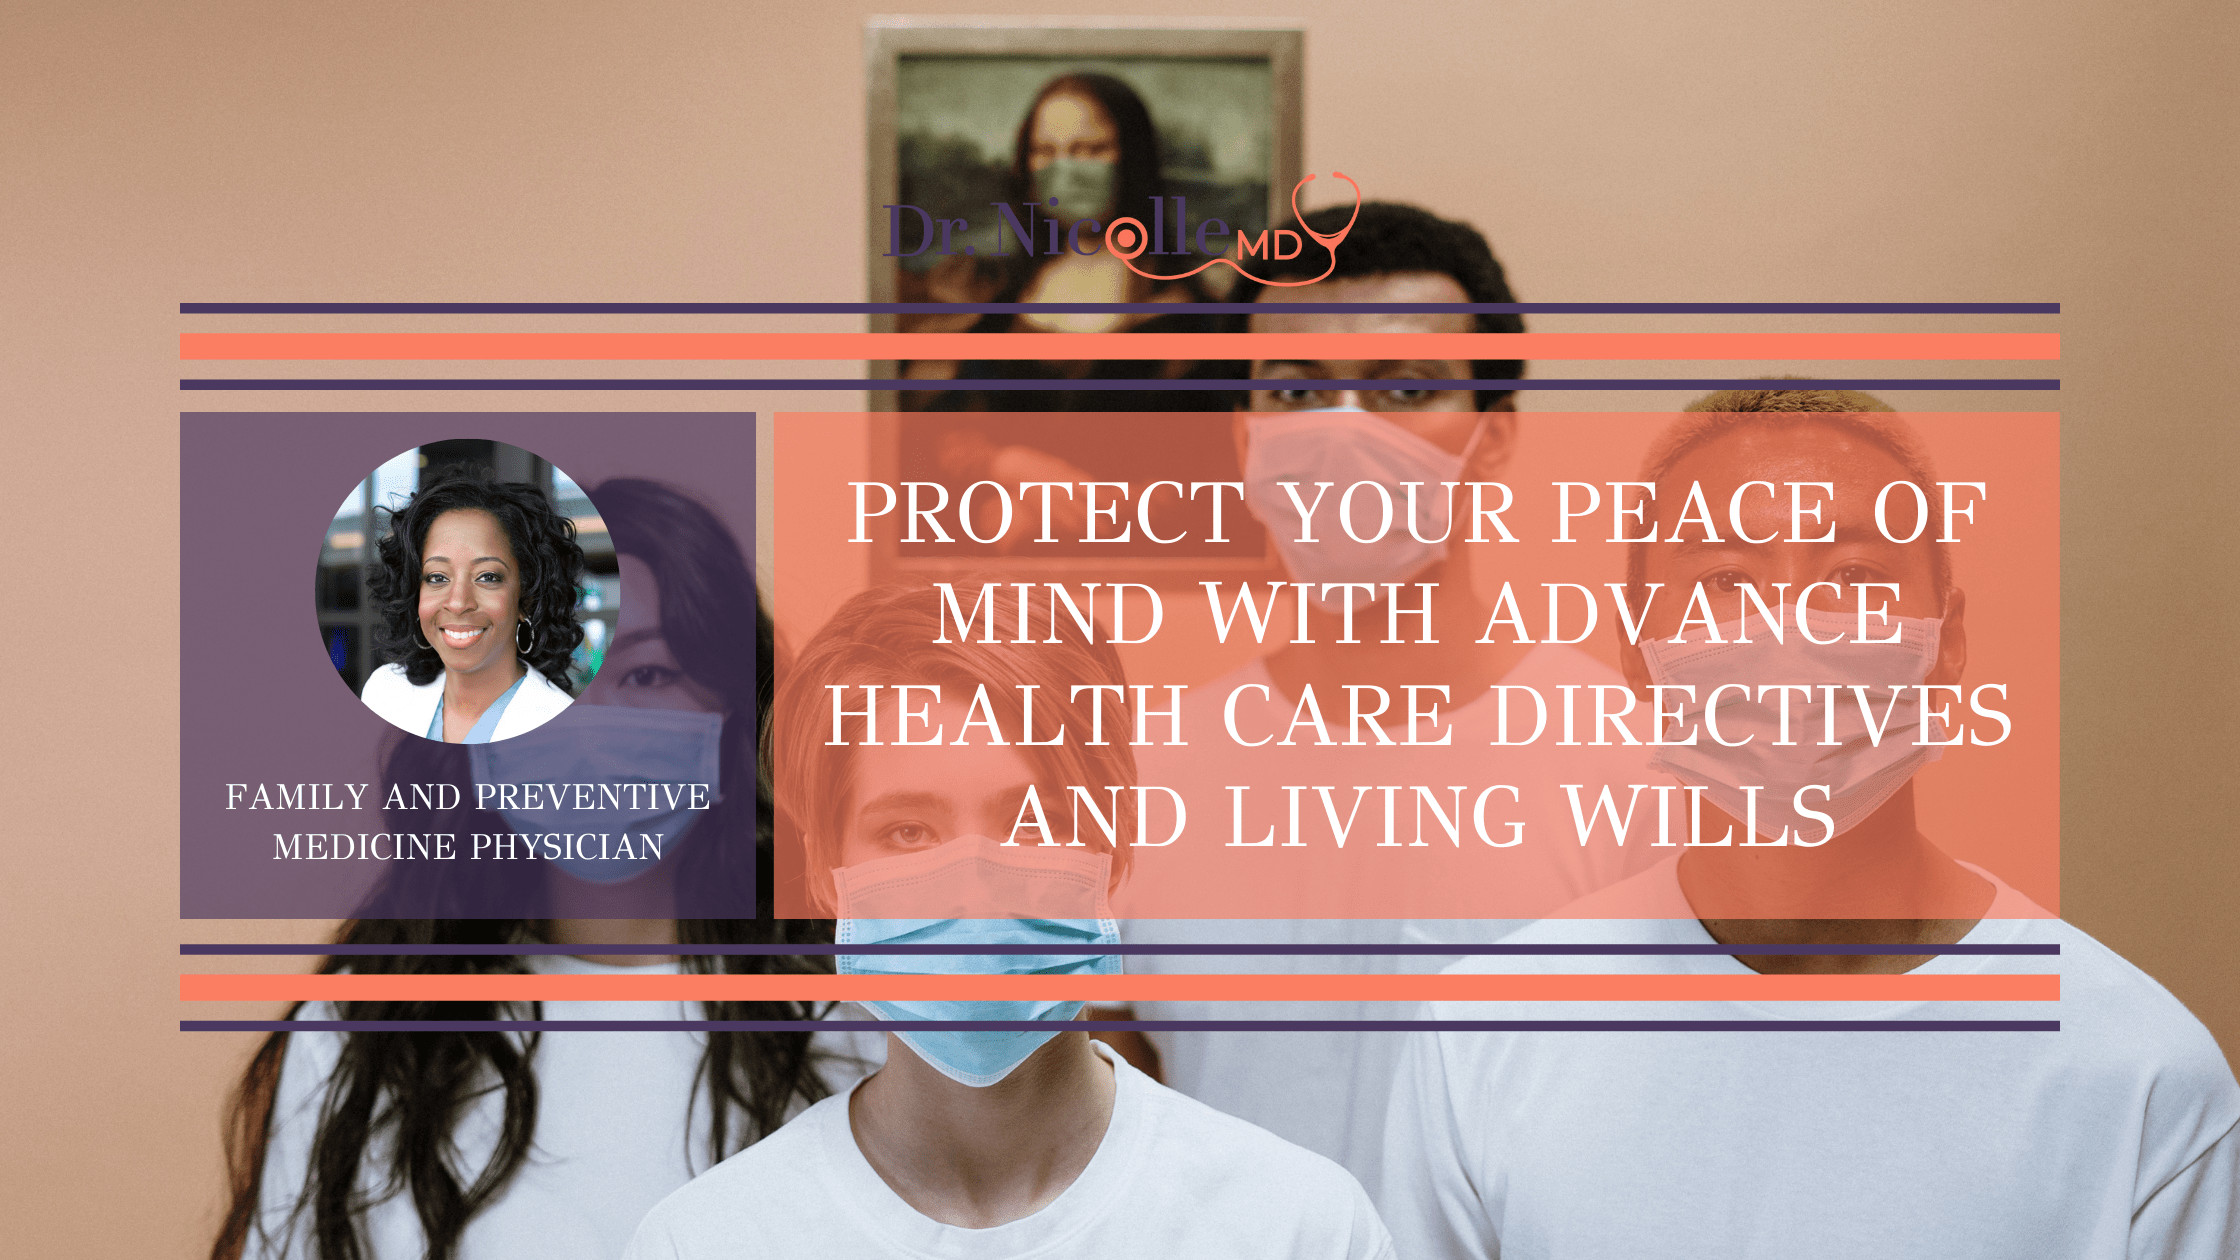 11Protect-Your-Peace-of-Mind-With-Advance-Health-Care-Directives-and-Living-Wills